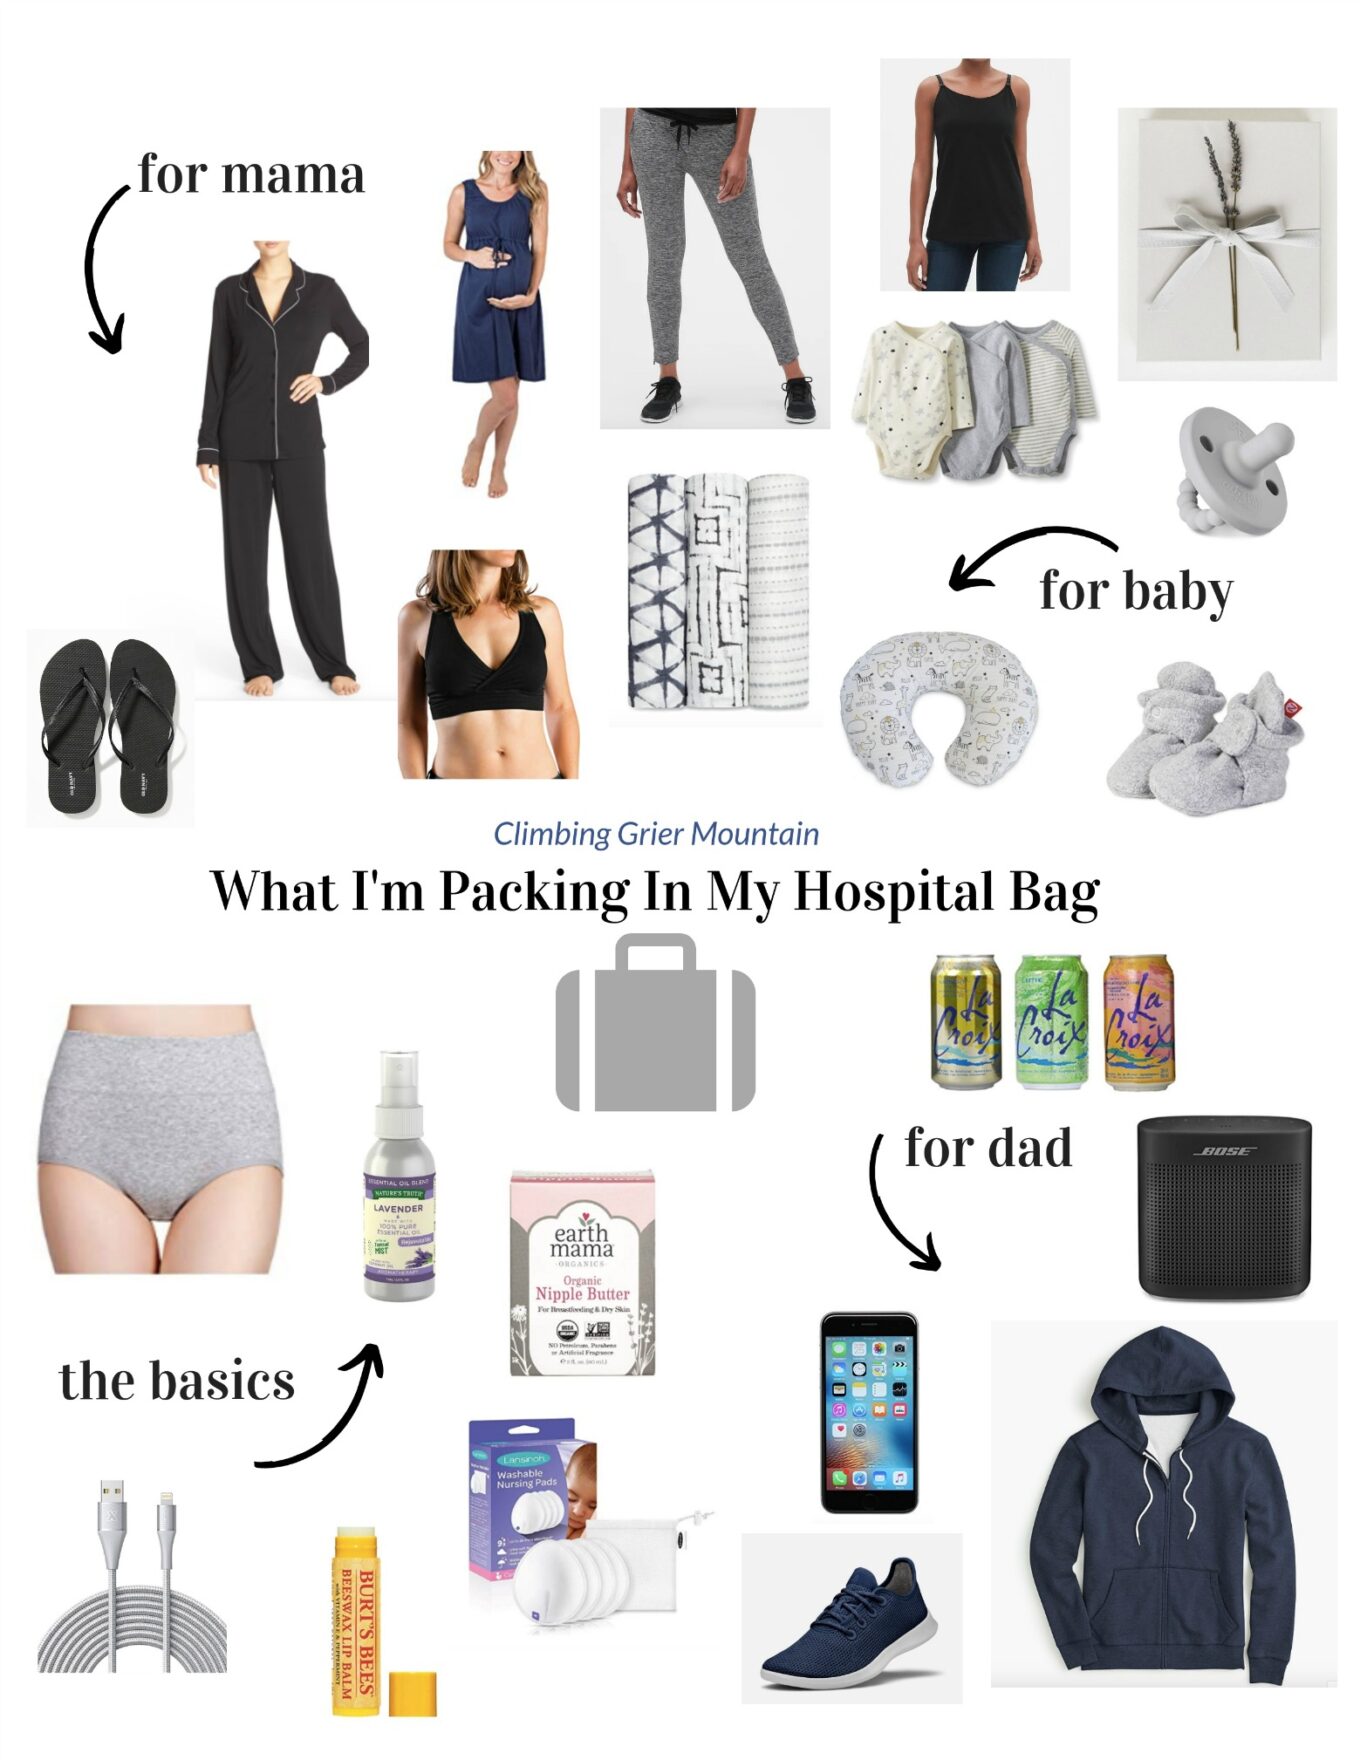 Discover 79+ packing your hospital bag - esthdonghoadian